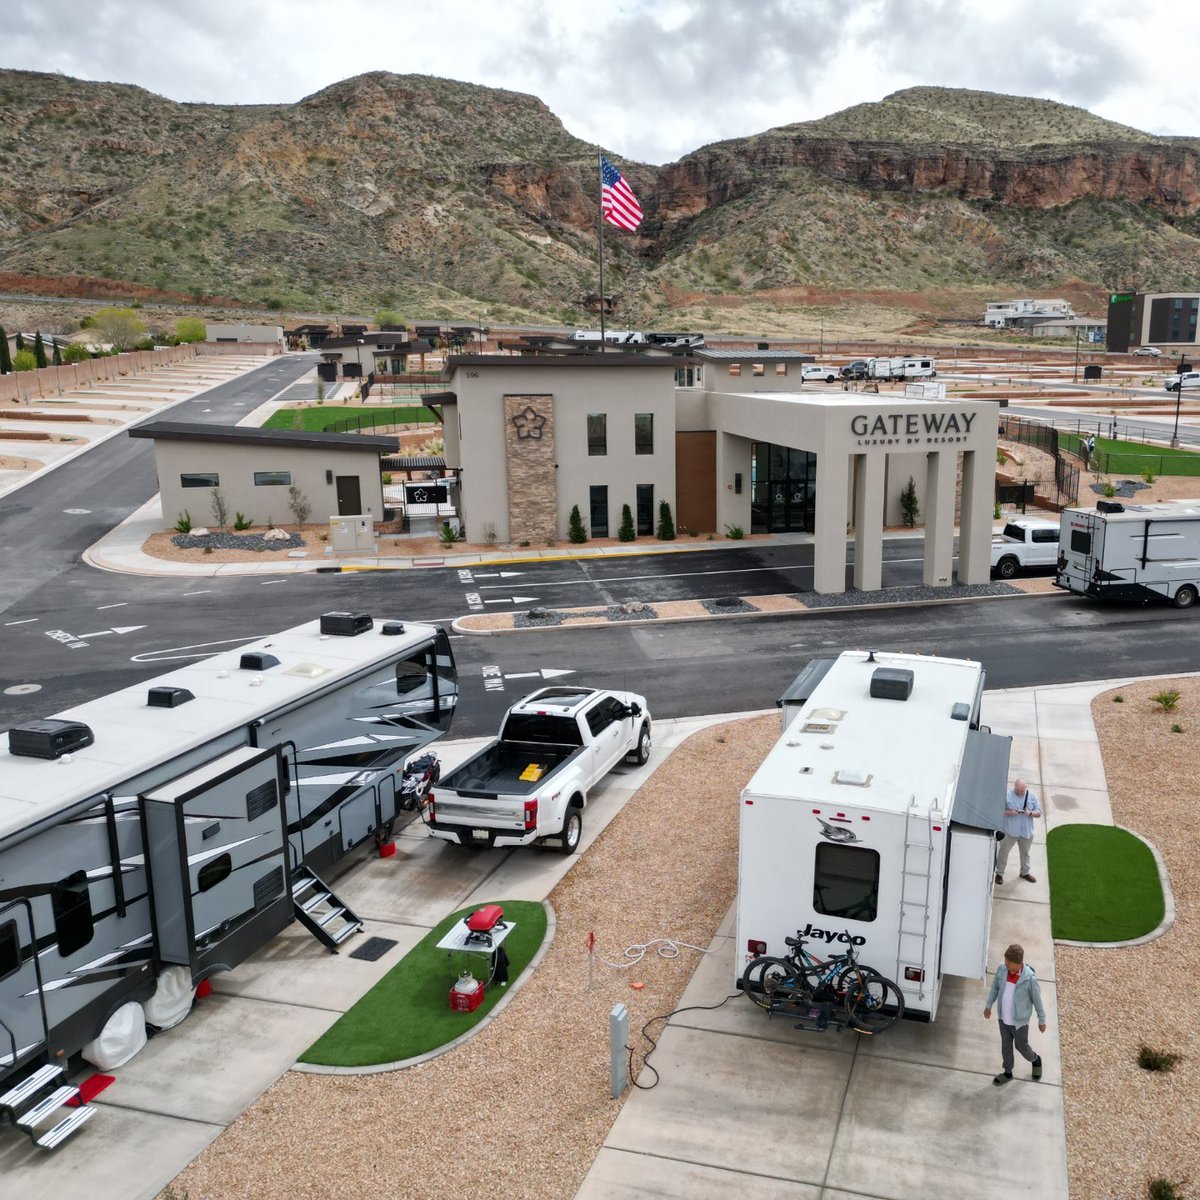 Gateway Luxury RV Resort unveils ultimate staycation destination in LaVerkin, Utah!

The grand opening celebration for the Gateway Luxury RV Resort is this Saturday, May 11th!
-
-
-
#rv #rvlife #roadtrip #motorhome #rvcountry #rvliving #camping #outdoors #wenrv #rvlifestyle